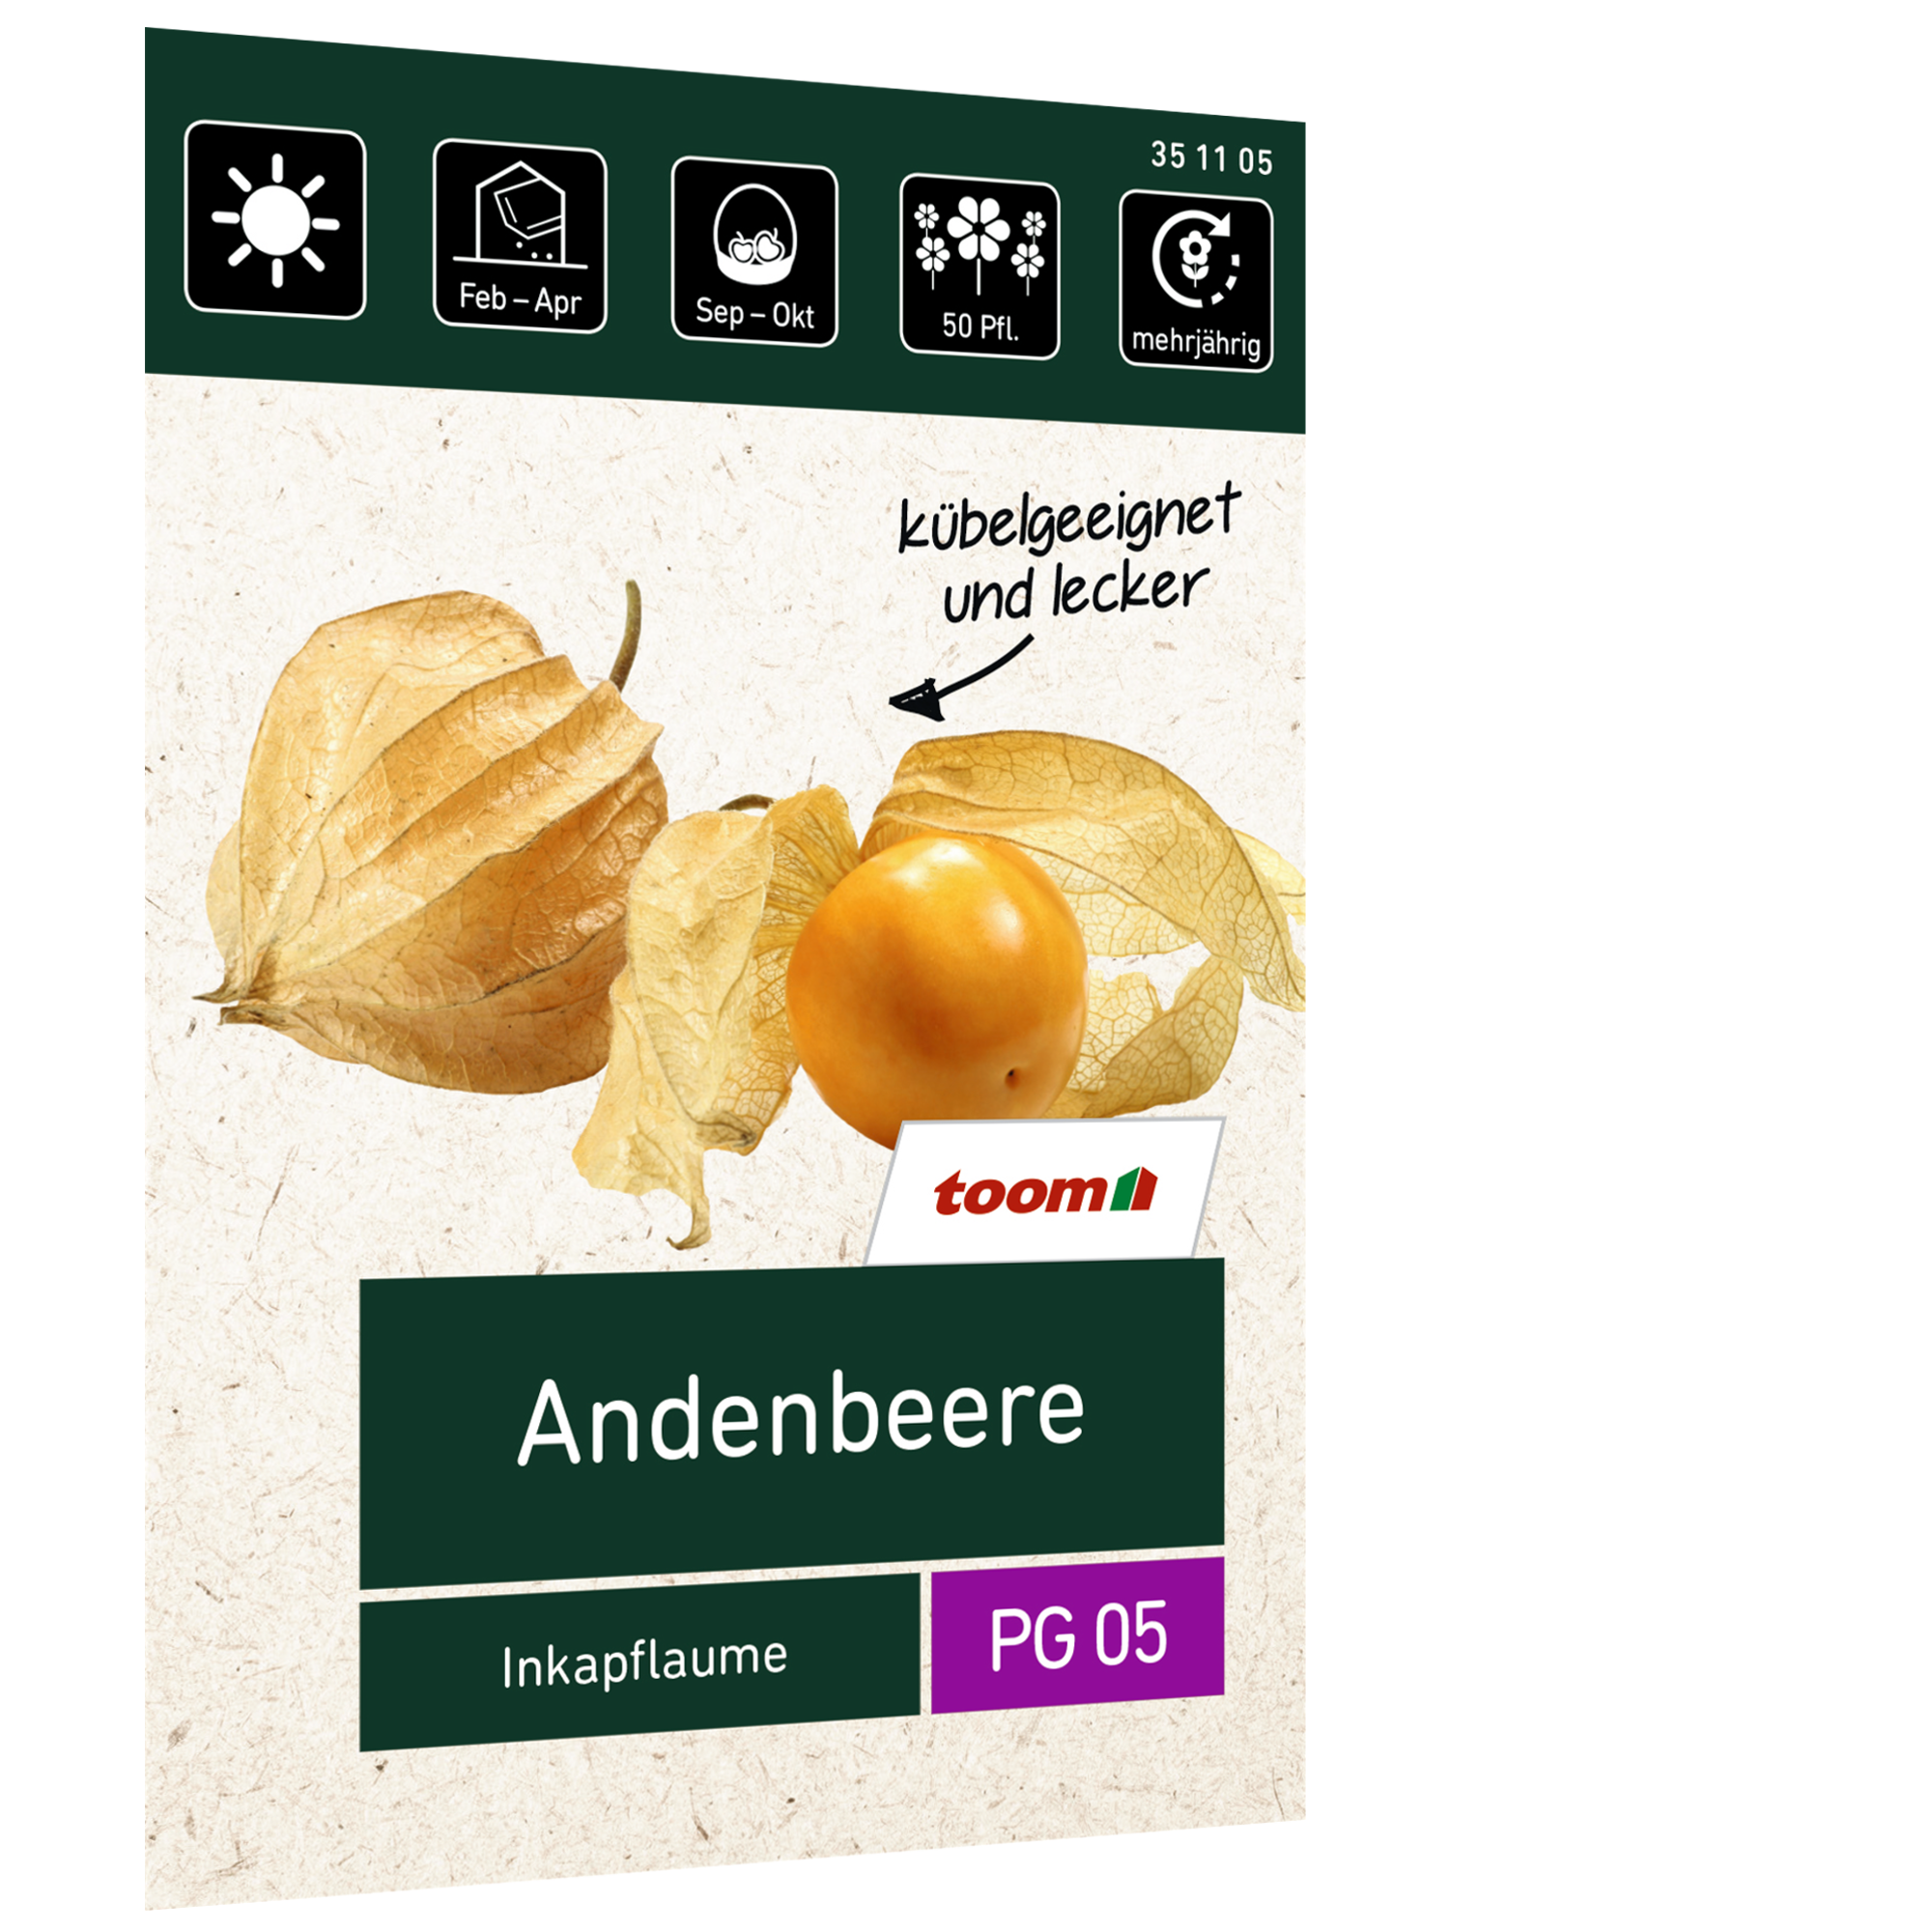 Andenbeere 'Inkapflaume' + product picture